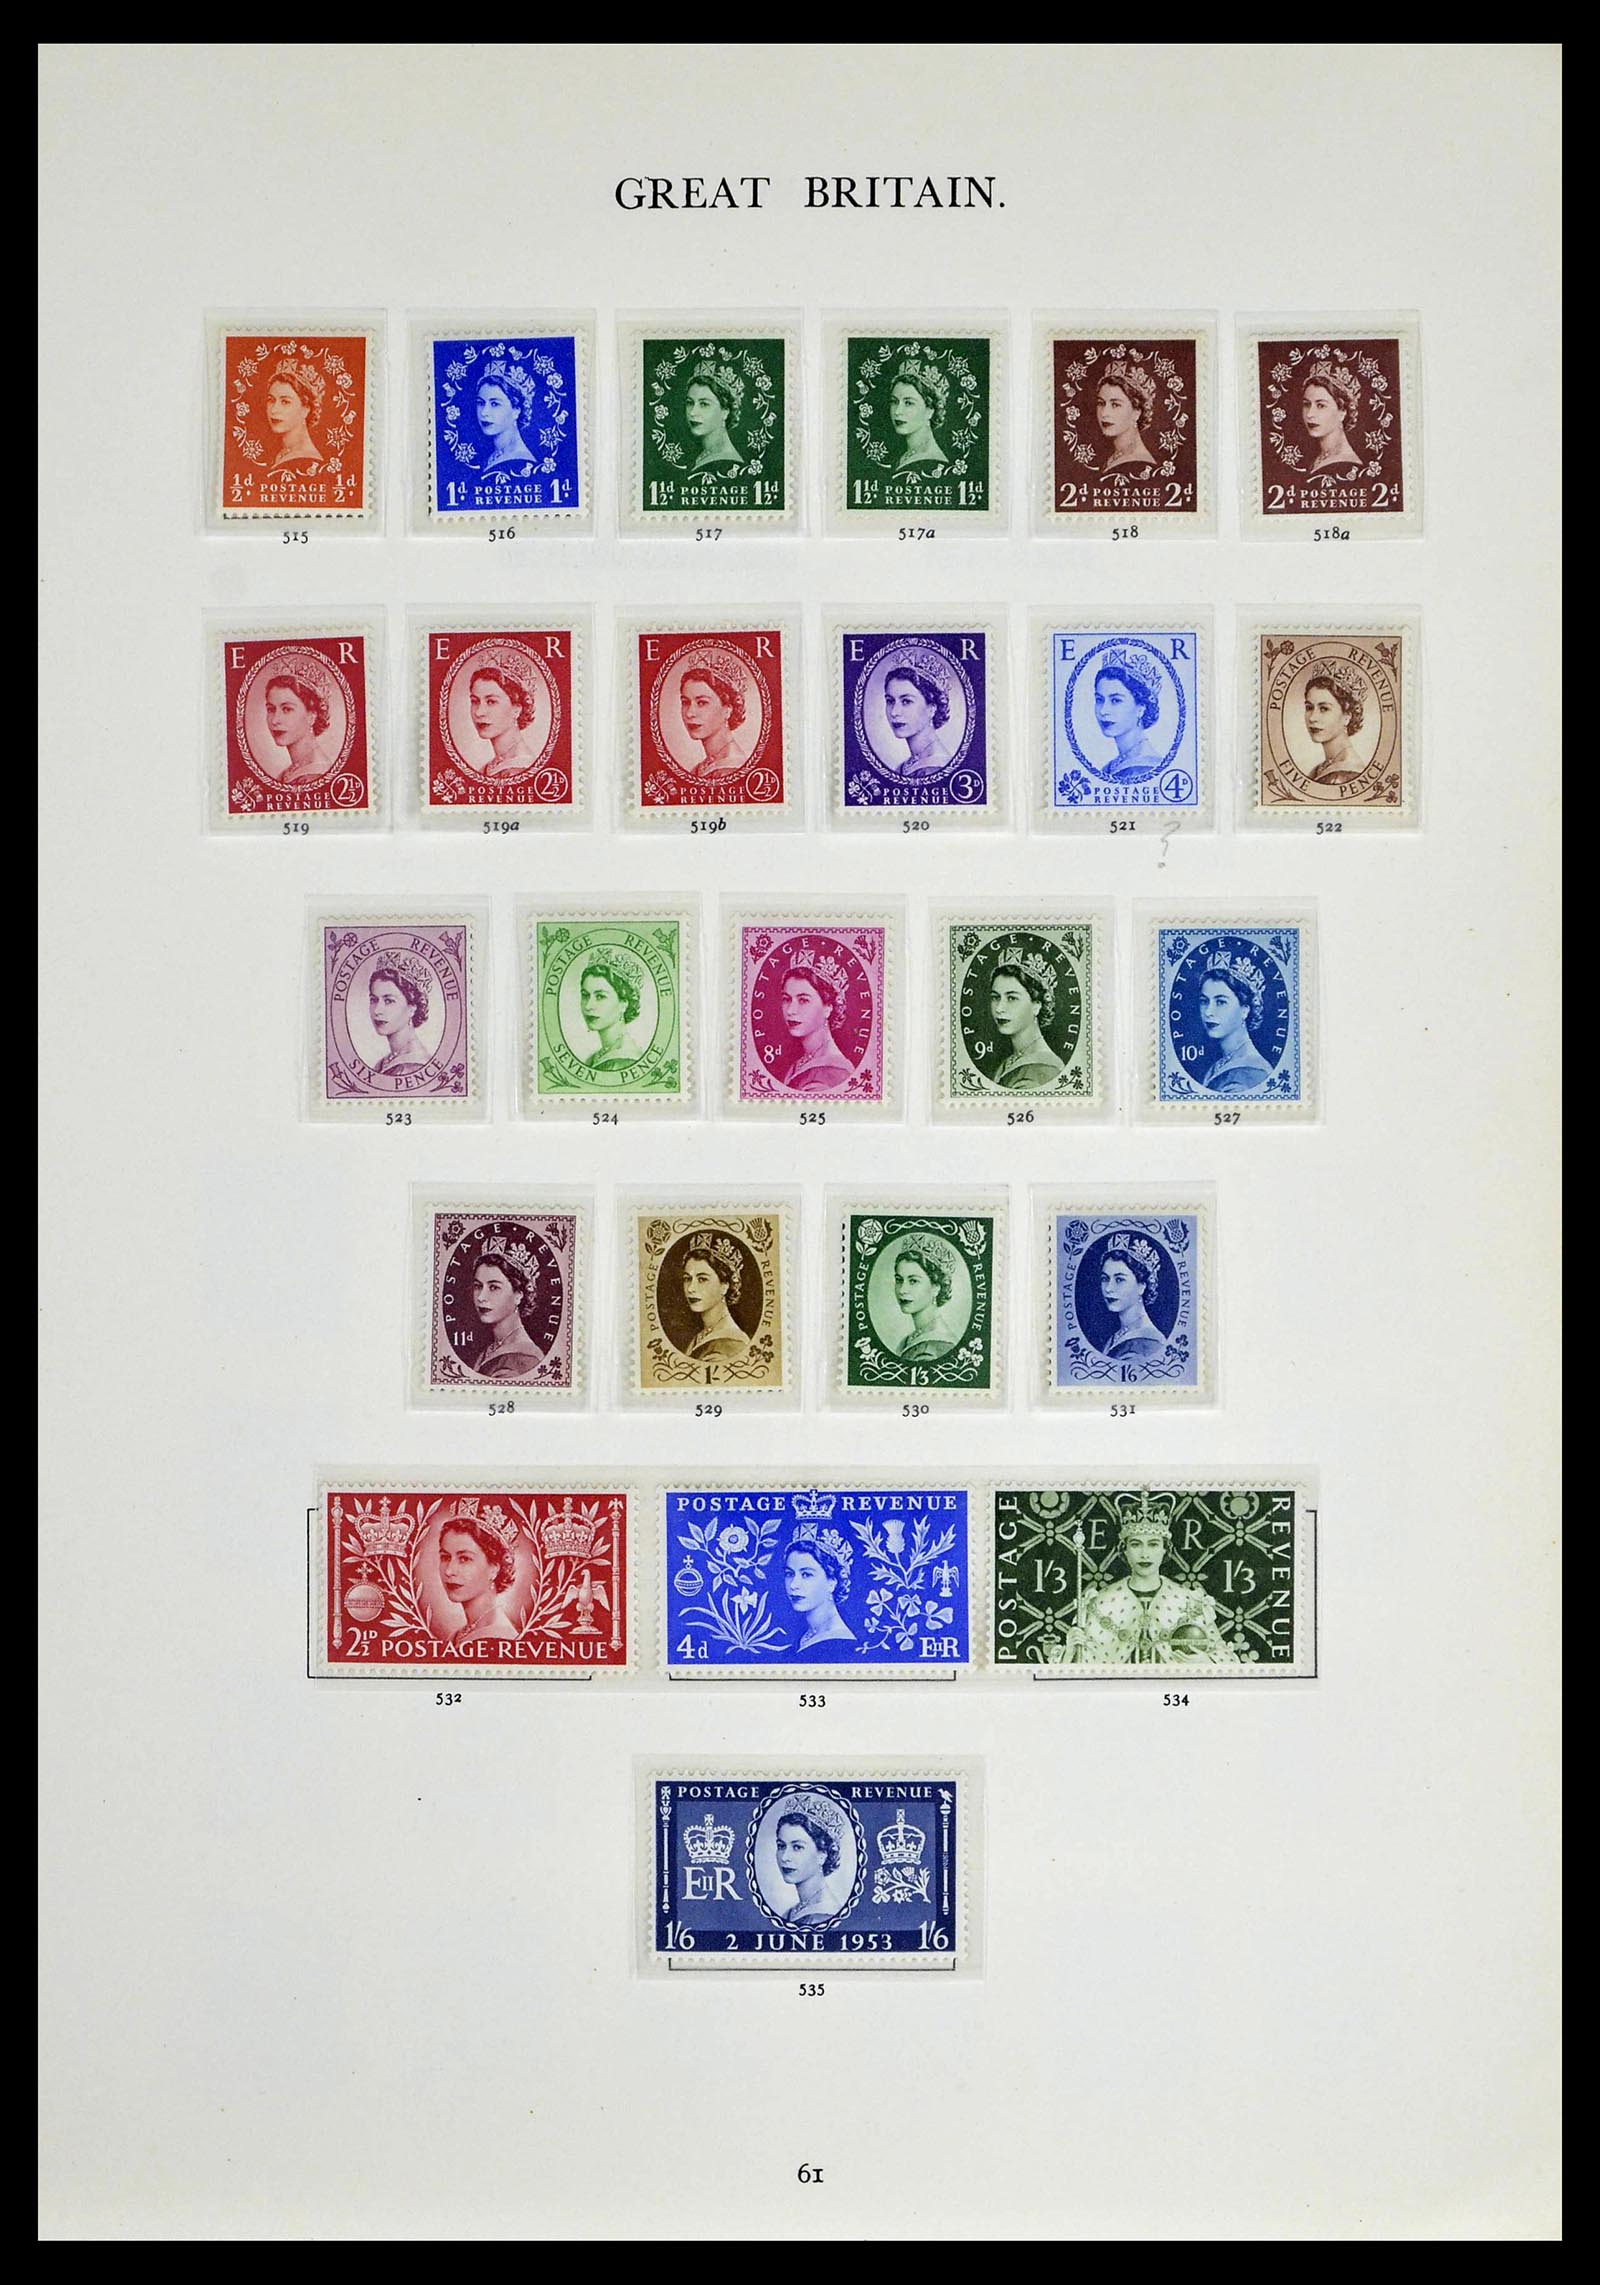 39025 0027 - Stamp collection 39025 Great Britain specialised 1840-1990.